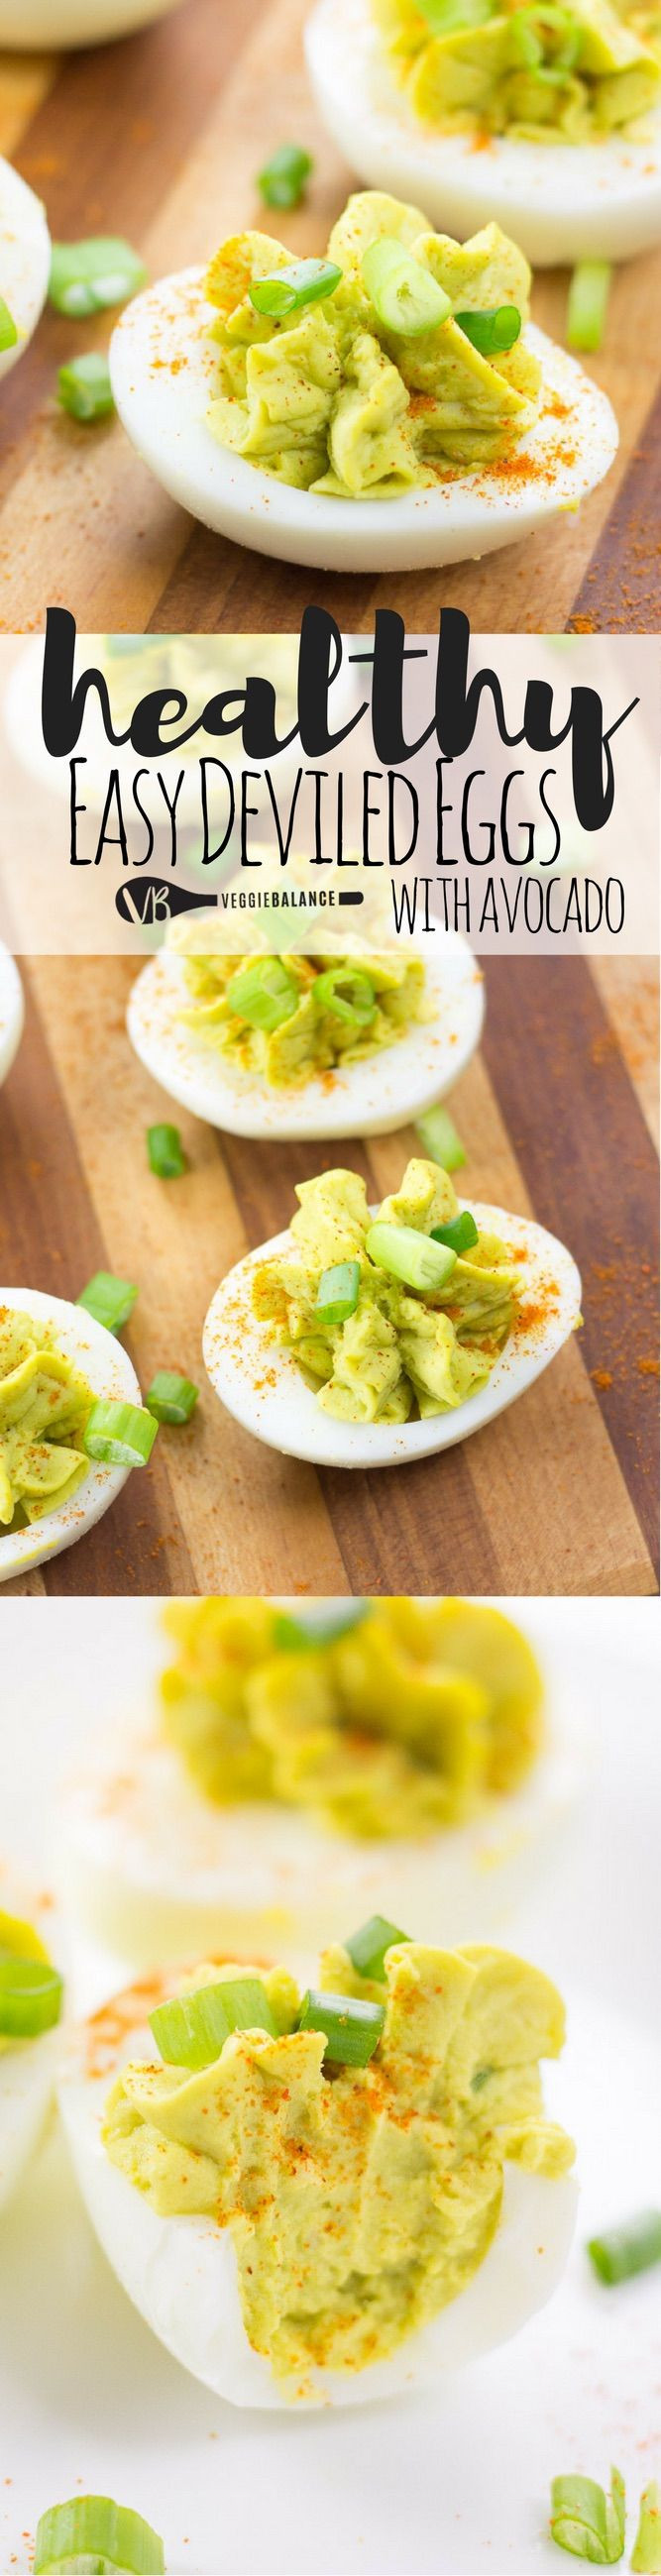 Healthy Deviled Eggs With Avocado
 25 best ideas about Healthy deviled eggs on Pinterest